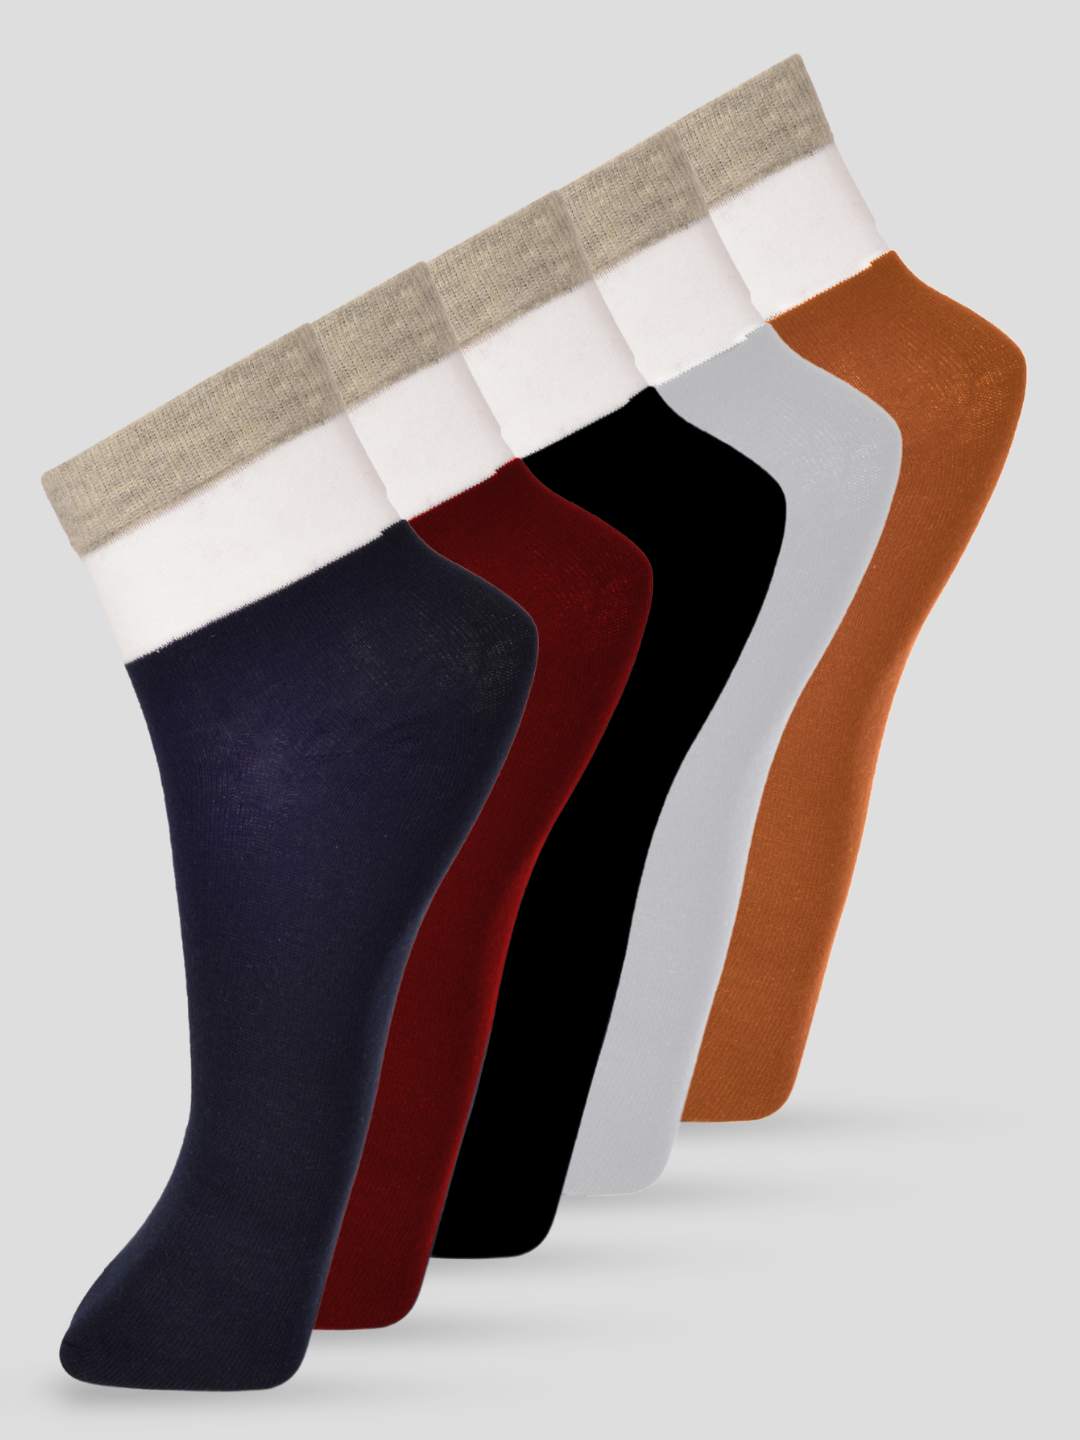 FRENCHIE PO5 SOLID COLOR BLOCKING DESIGN ANKLE LENGTH CUT ASSORTED COTTON  SOCKS 09